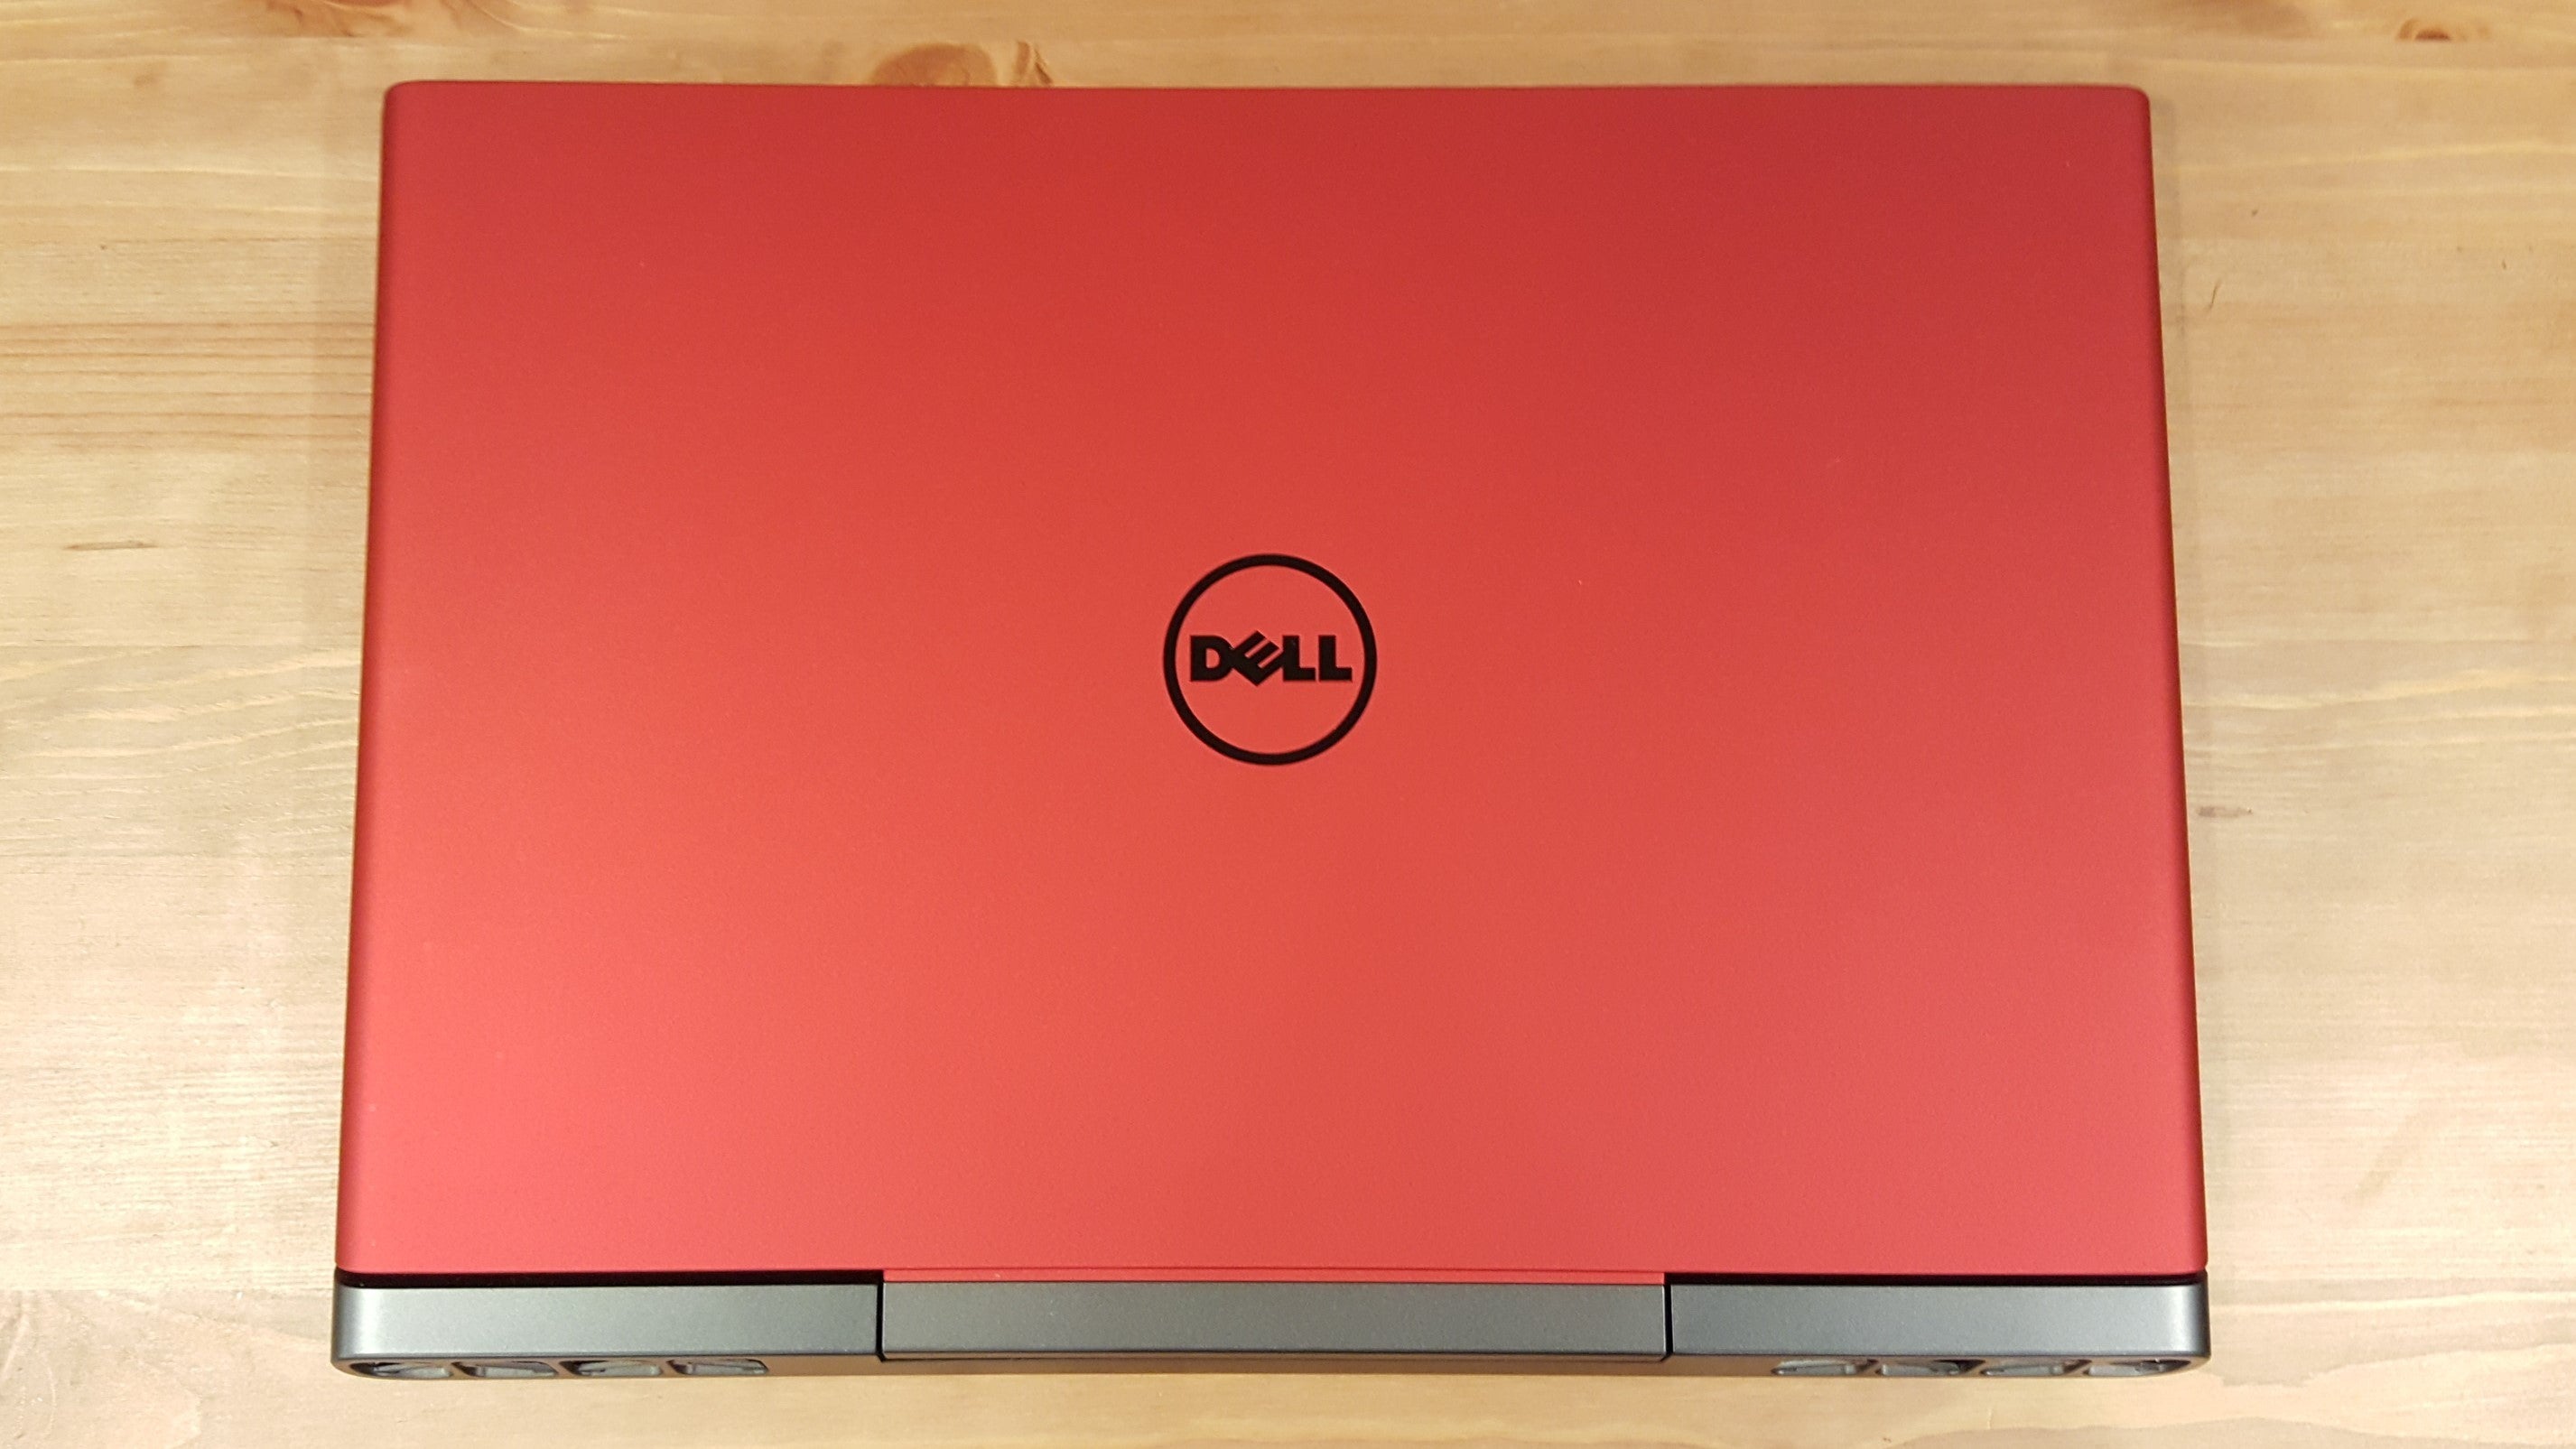 Dell Inspiron 15 7000 gaming laptop review: Just one flaw - Tech